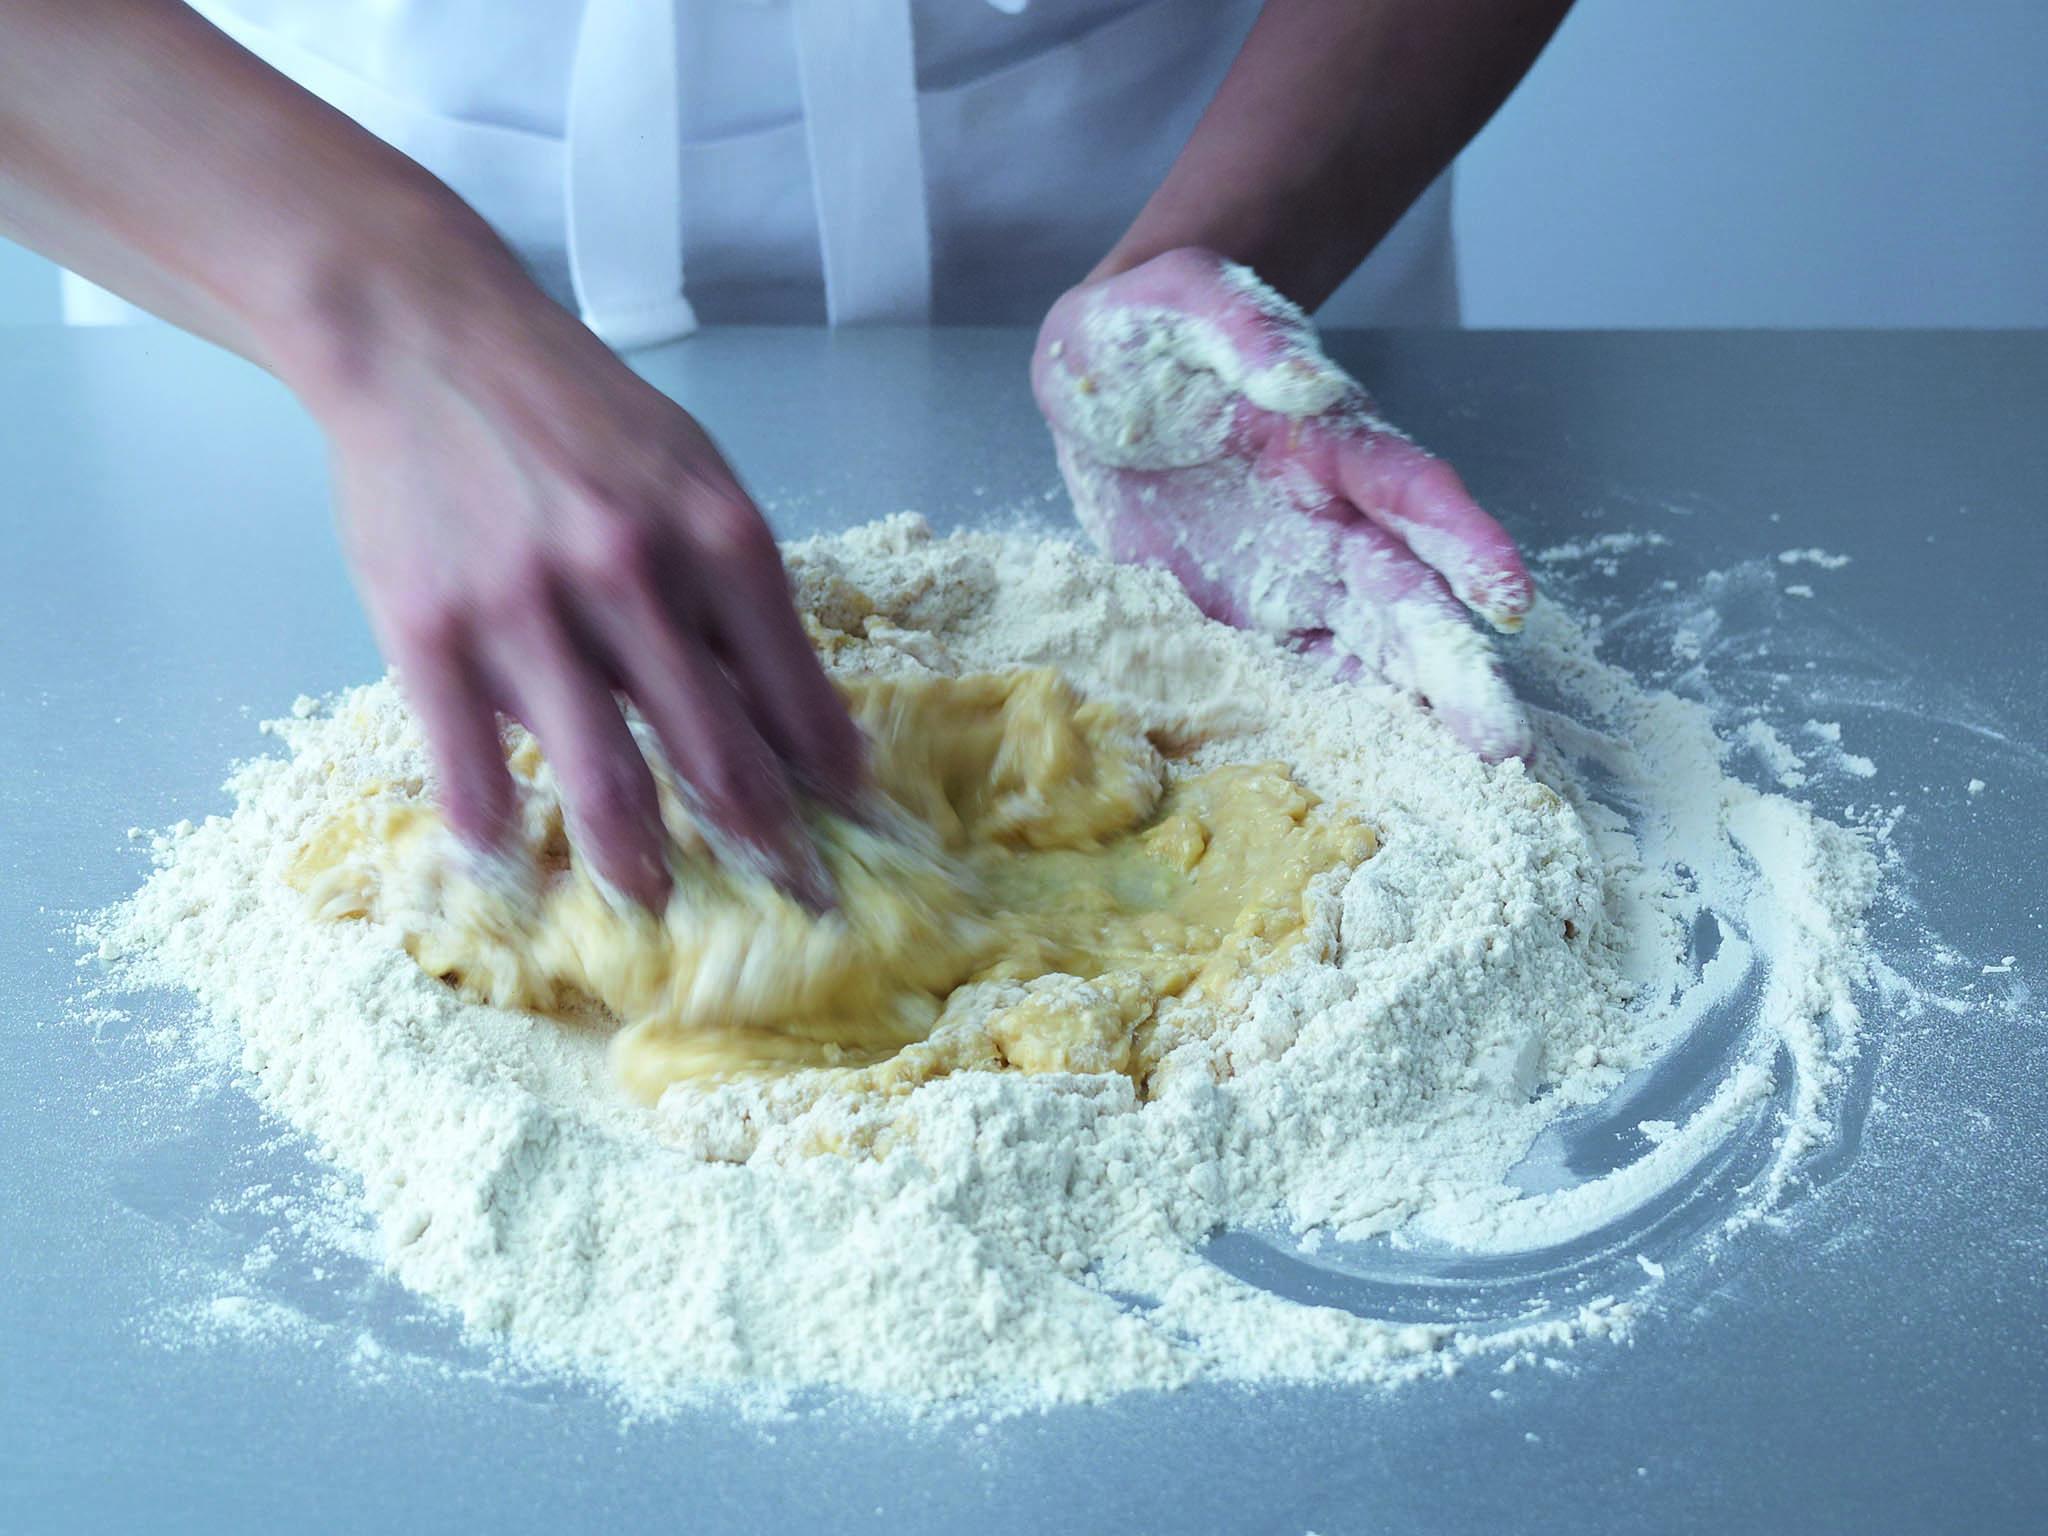 4. Continue until you have a firm, rather than wet and sticky, dough. You will not need to incorporate all the flour. Scrape aside any leftover flour to prevent it from making the dough stiffer